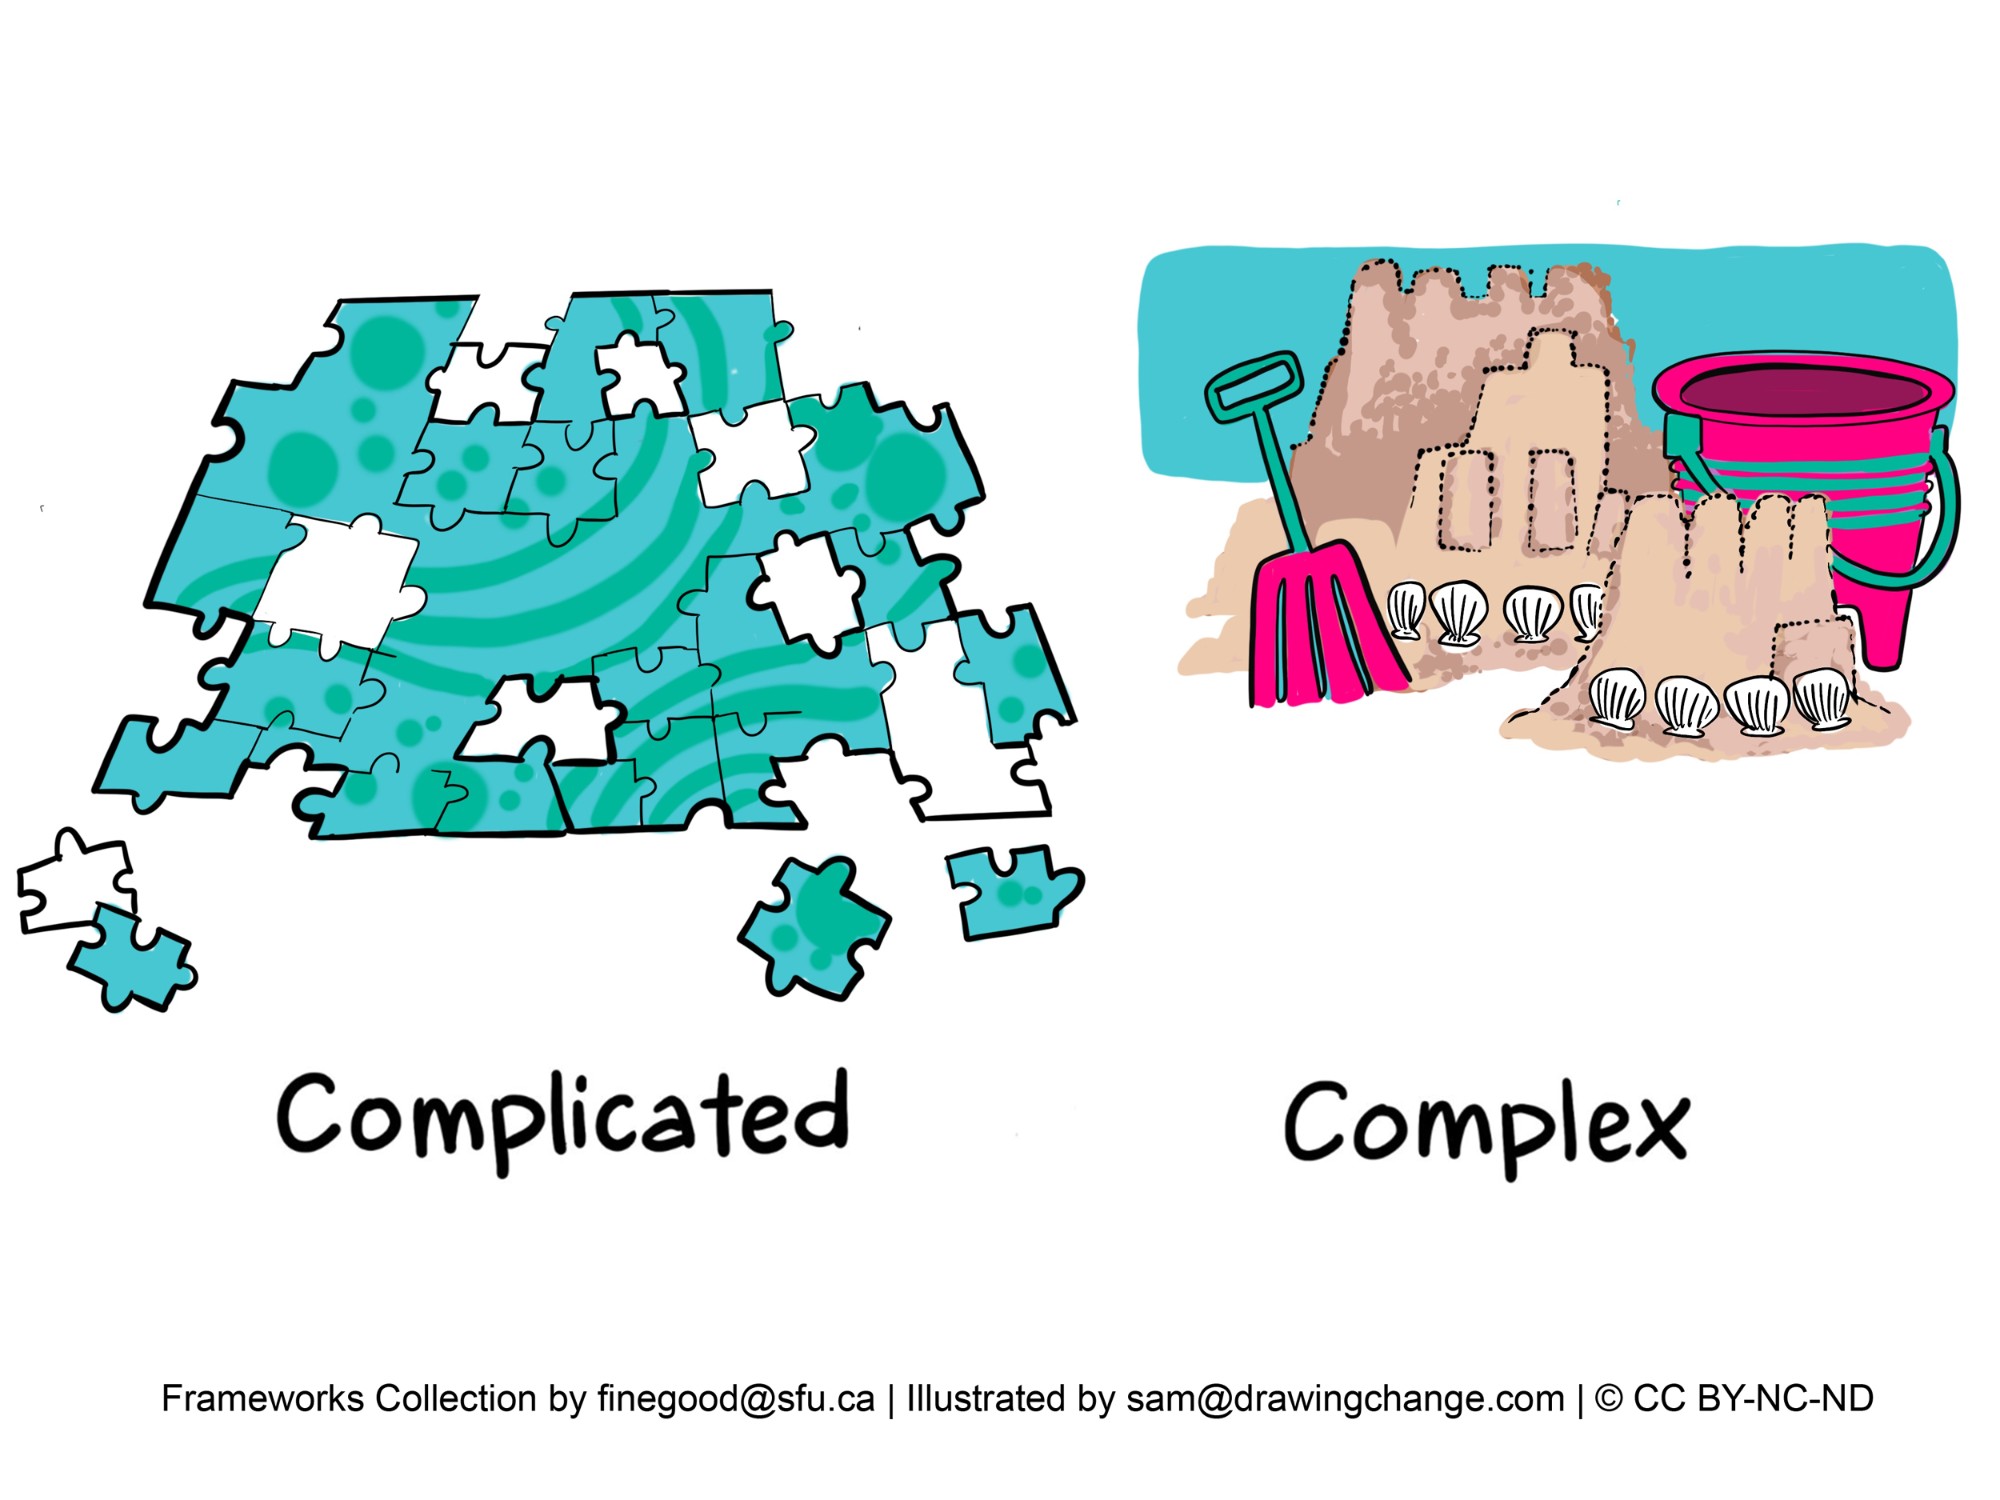 On the left, the label "Complicated" sits above an illustration of an incomplete jigsaw puzzle with several pieces disconnected. This represents complicated systems or problems where all the necessary pieces exist, but fitting them together requires expertise and understanding of how they interconnect.  On the right, the label "Complex" is paired with a drawing of a sandcastle surrounded by a bucket and a spade, with seashells decorating the castle's base. This symbolizes complex systems or problems that are more organic, mutable, and may change over time, like building a sandcastle that can be reshaped by new ideas or external forces like the tide.